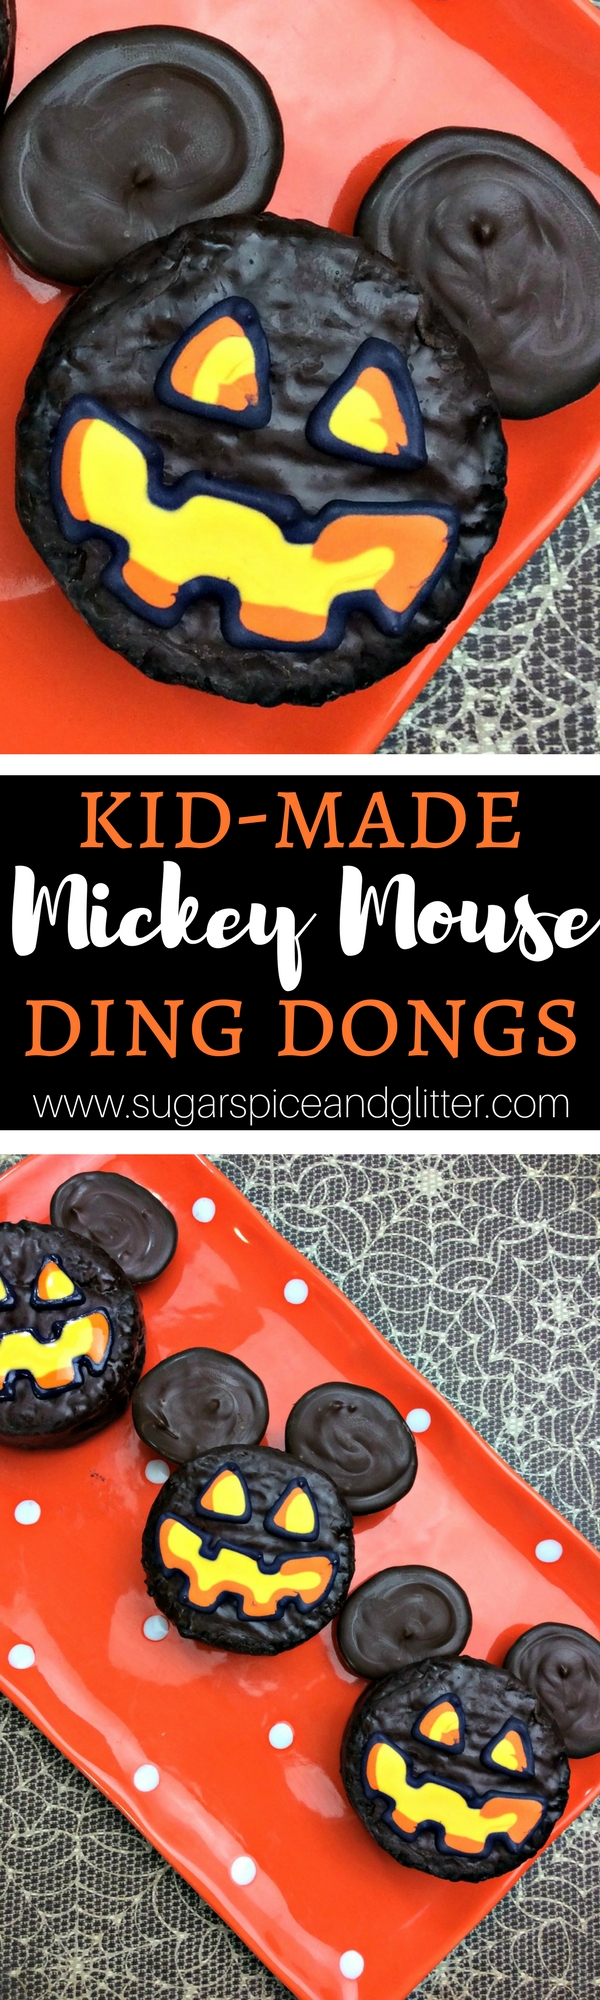 Kid-made Mickey Mouse Ding Dongs